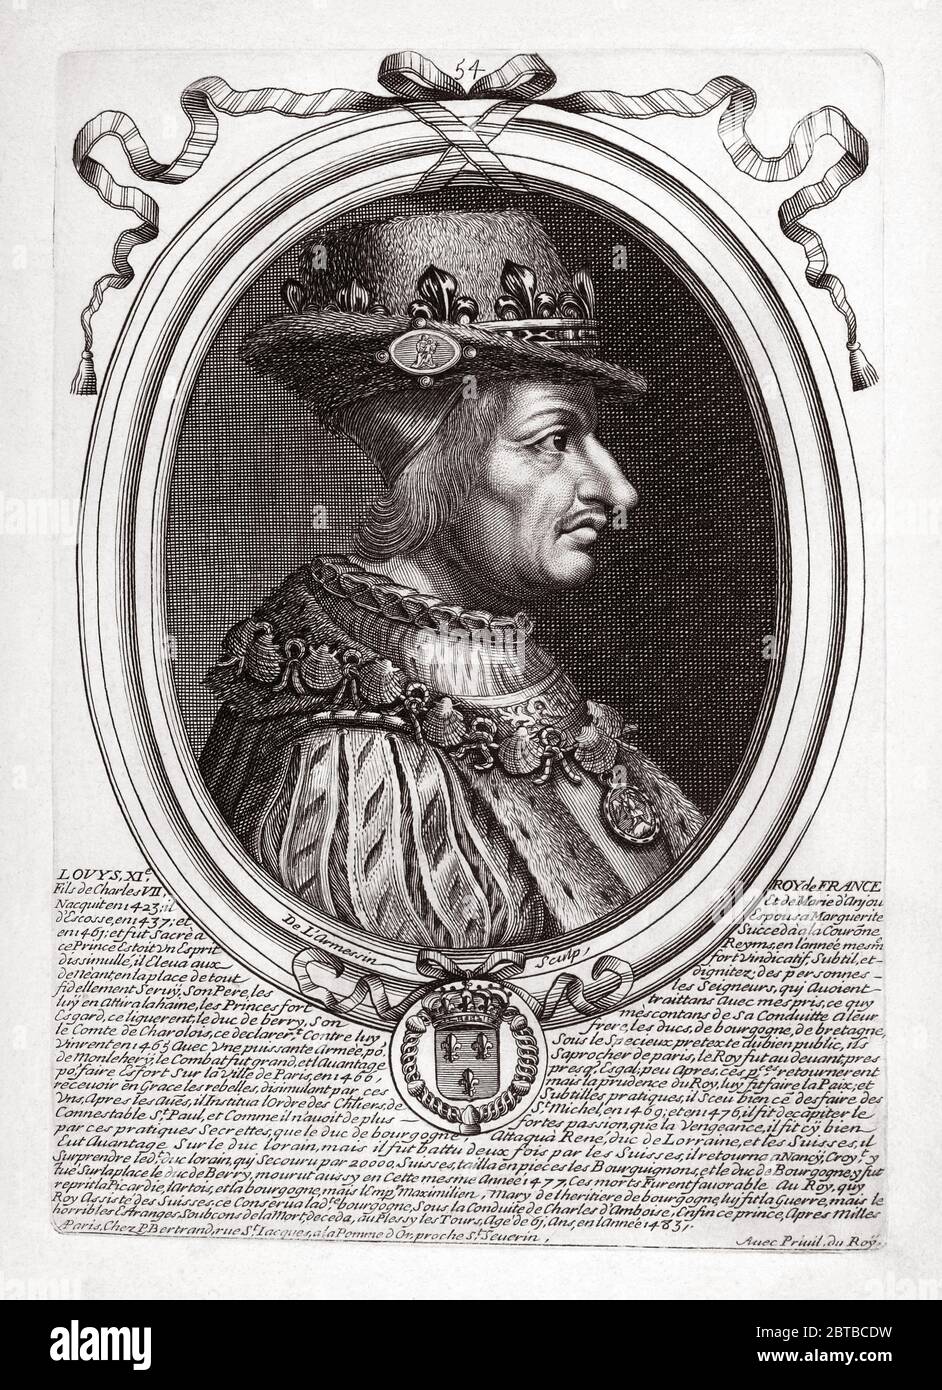 1480 ca, FRANCE: The French King LOUIS XI Valois ( 1423 - 1483 ) dit Le Prudent . Father of King Charles VIII . Engraved portrait by NICOLAS de LARMESSIN ( 1632 - 1694 9 , pubblished in 1690 - NOBILITY - NOBILI francesi - Nobiltà francese - FRANCIA - illustrazione - illustration - engraving - incisione - LUIGI XI Re di Francia --- ARCHIVIO GBB Stock Photo